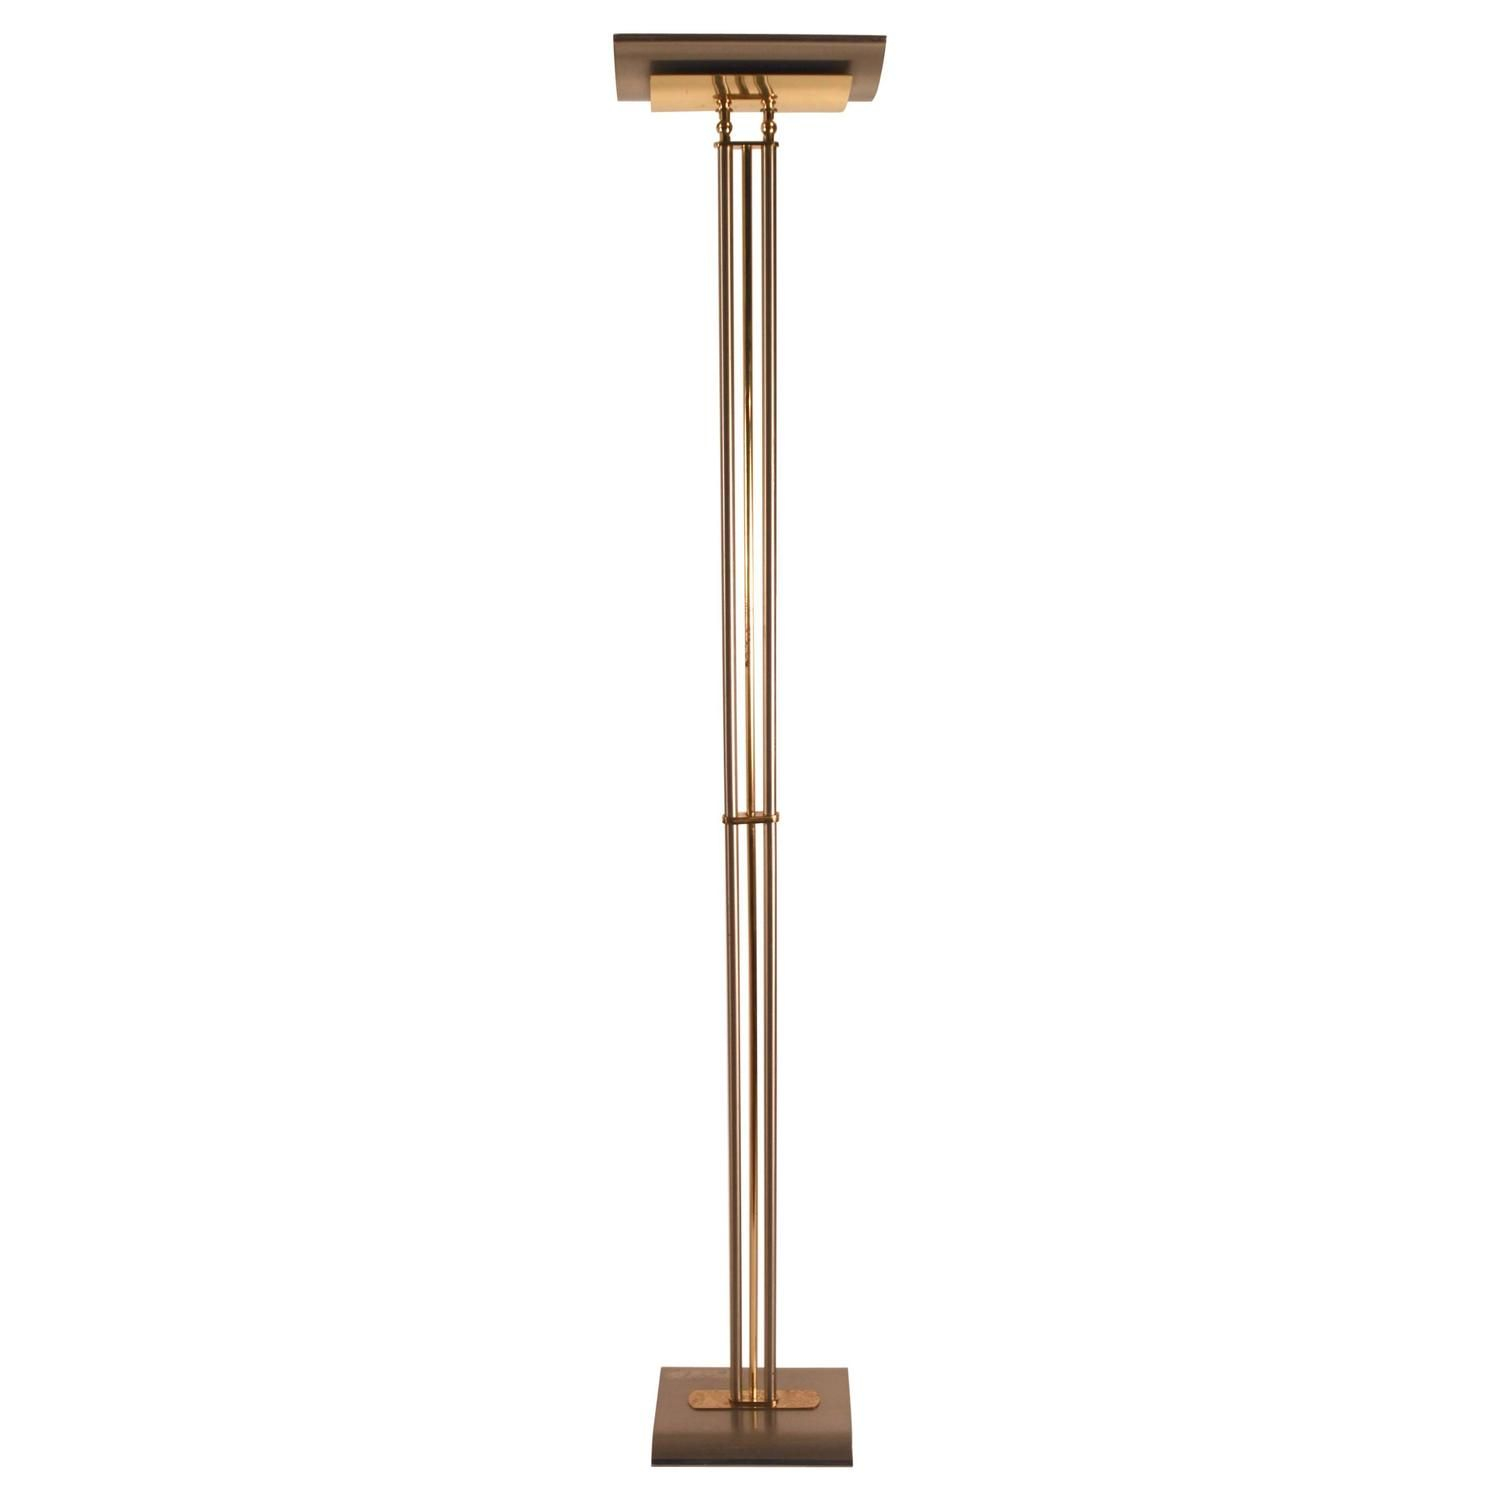 Italian Made Halogen Floor Lamp Torchiere Brass And Steel throughout sizing 1500 X 1500